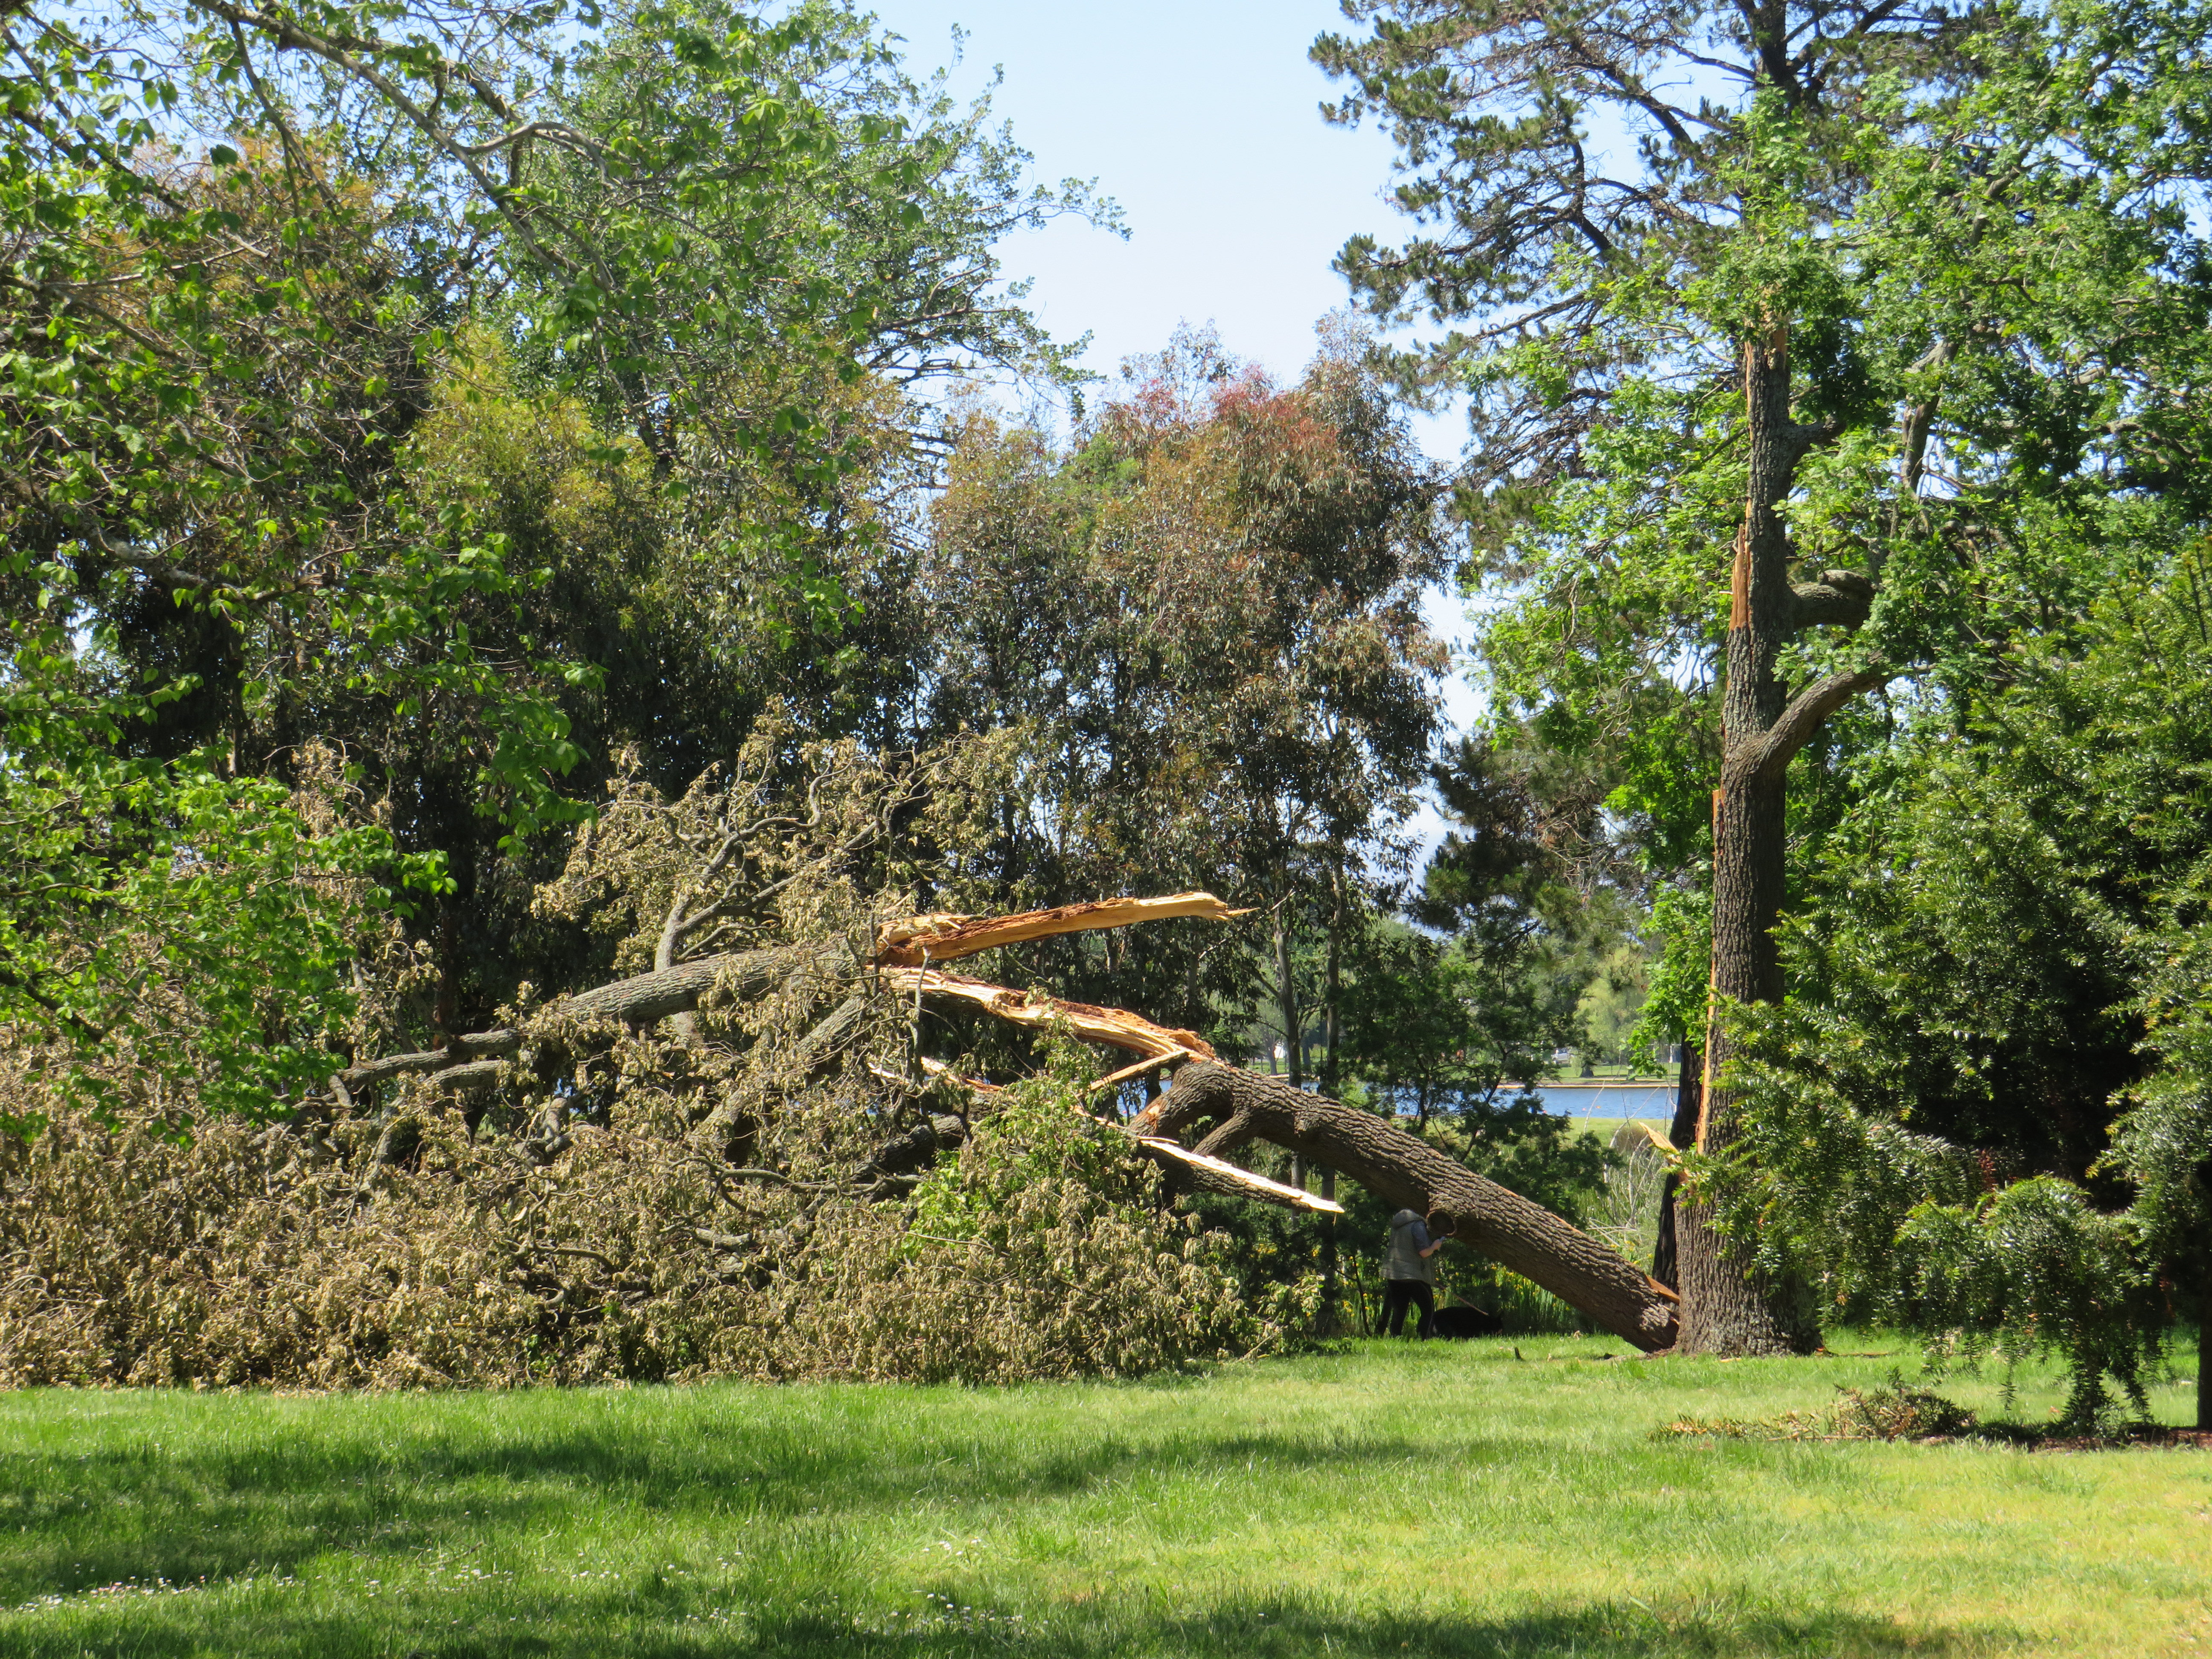 Large trees that were blown down in the botanic gardens